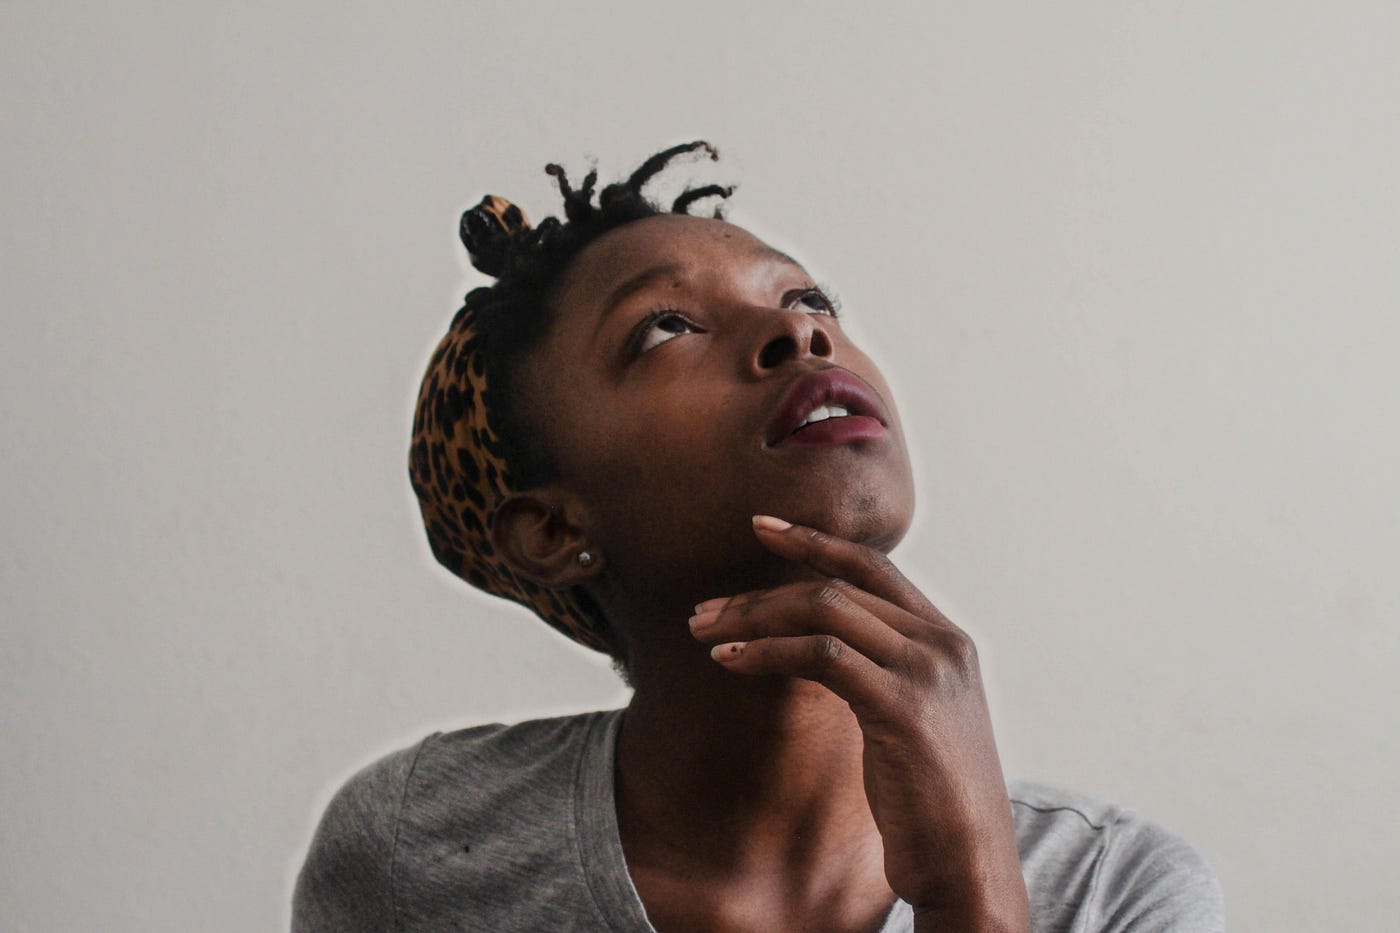 Black woman looks skyward, her hands clasped under her chin. She wears a gray shirt.